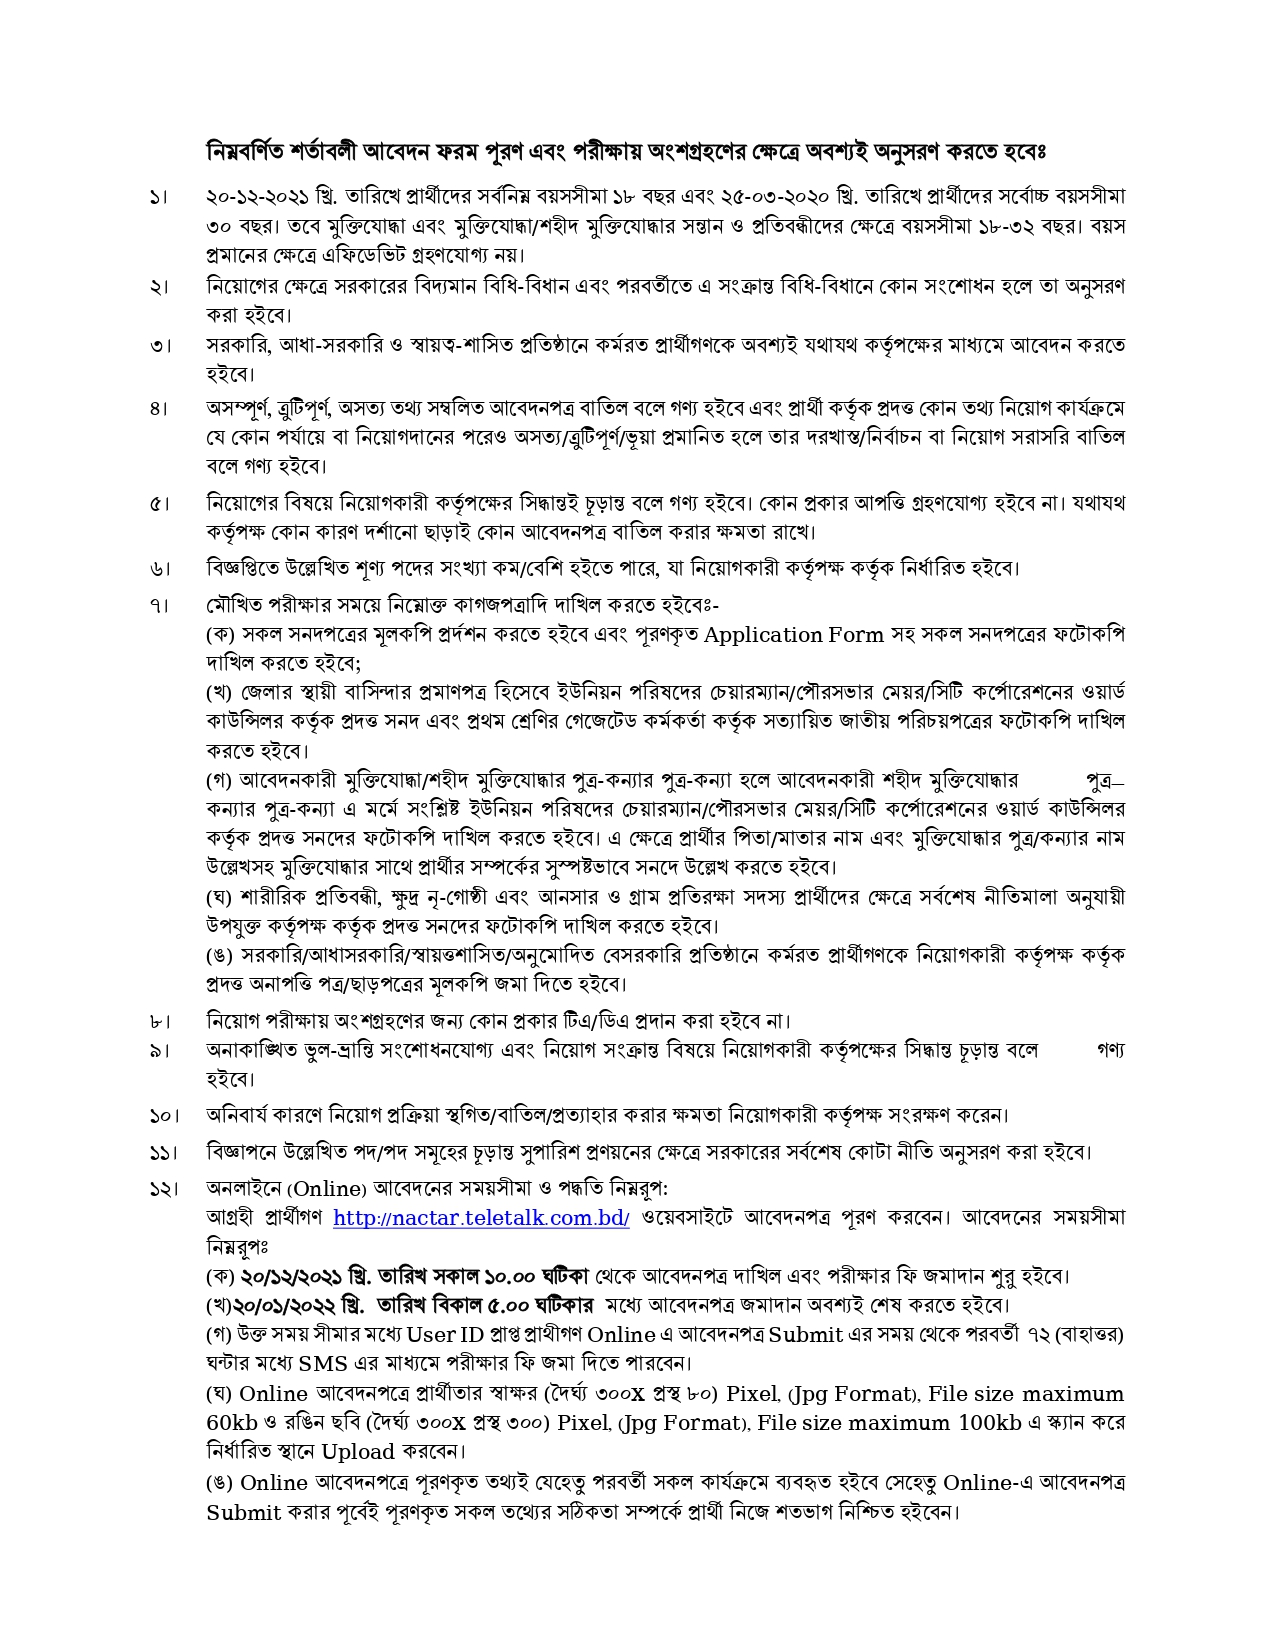 National Academy for Computer Training And Research Job Circular